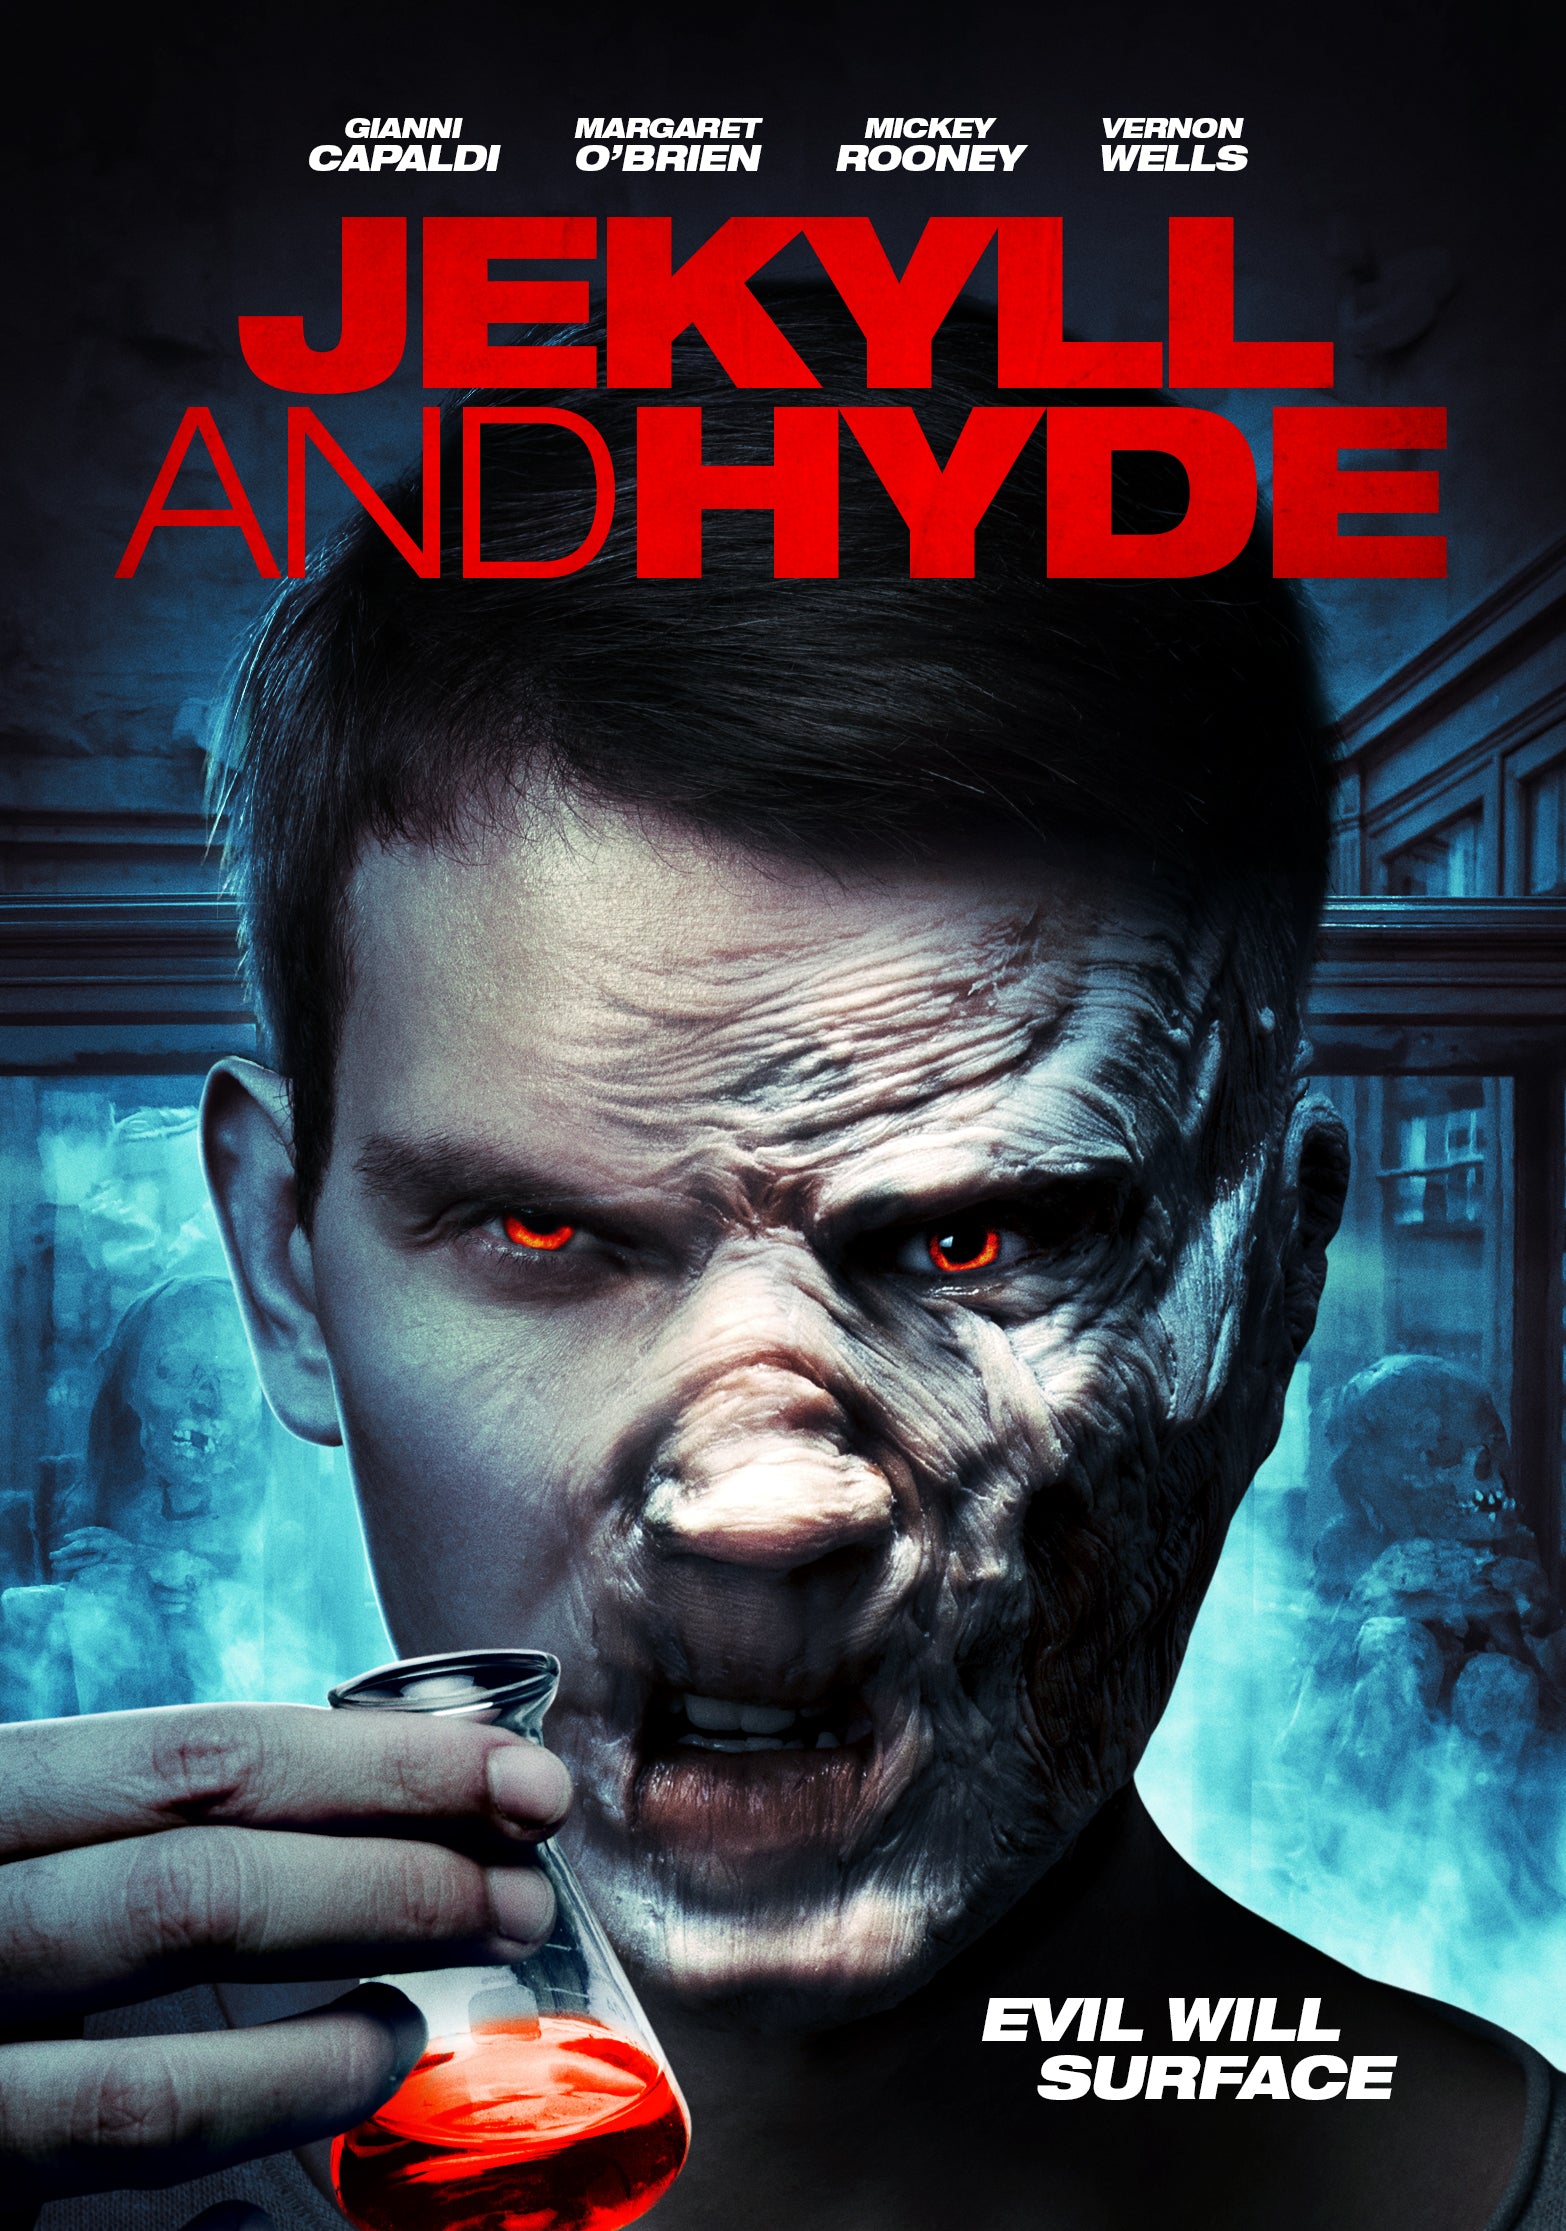 JEKYLL AND HYDE DVD